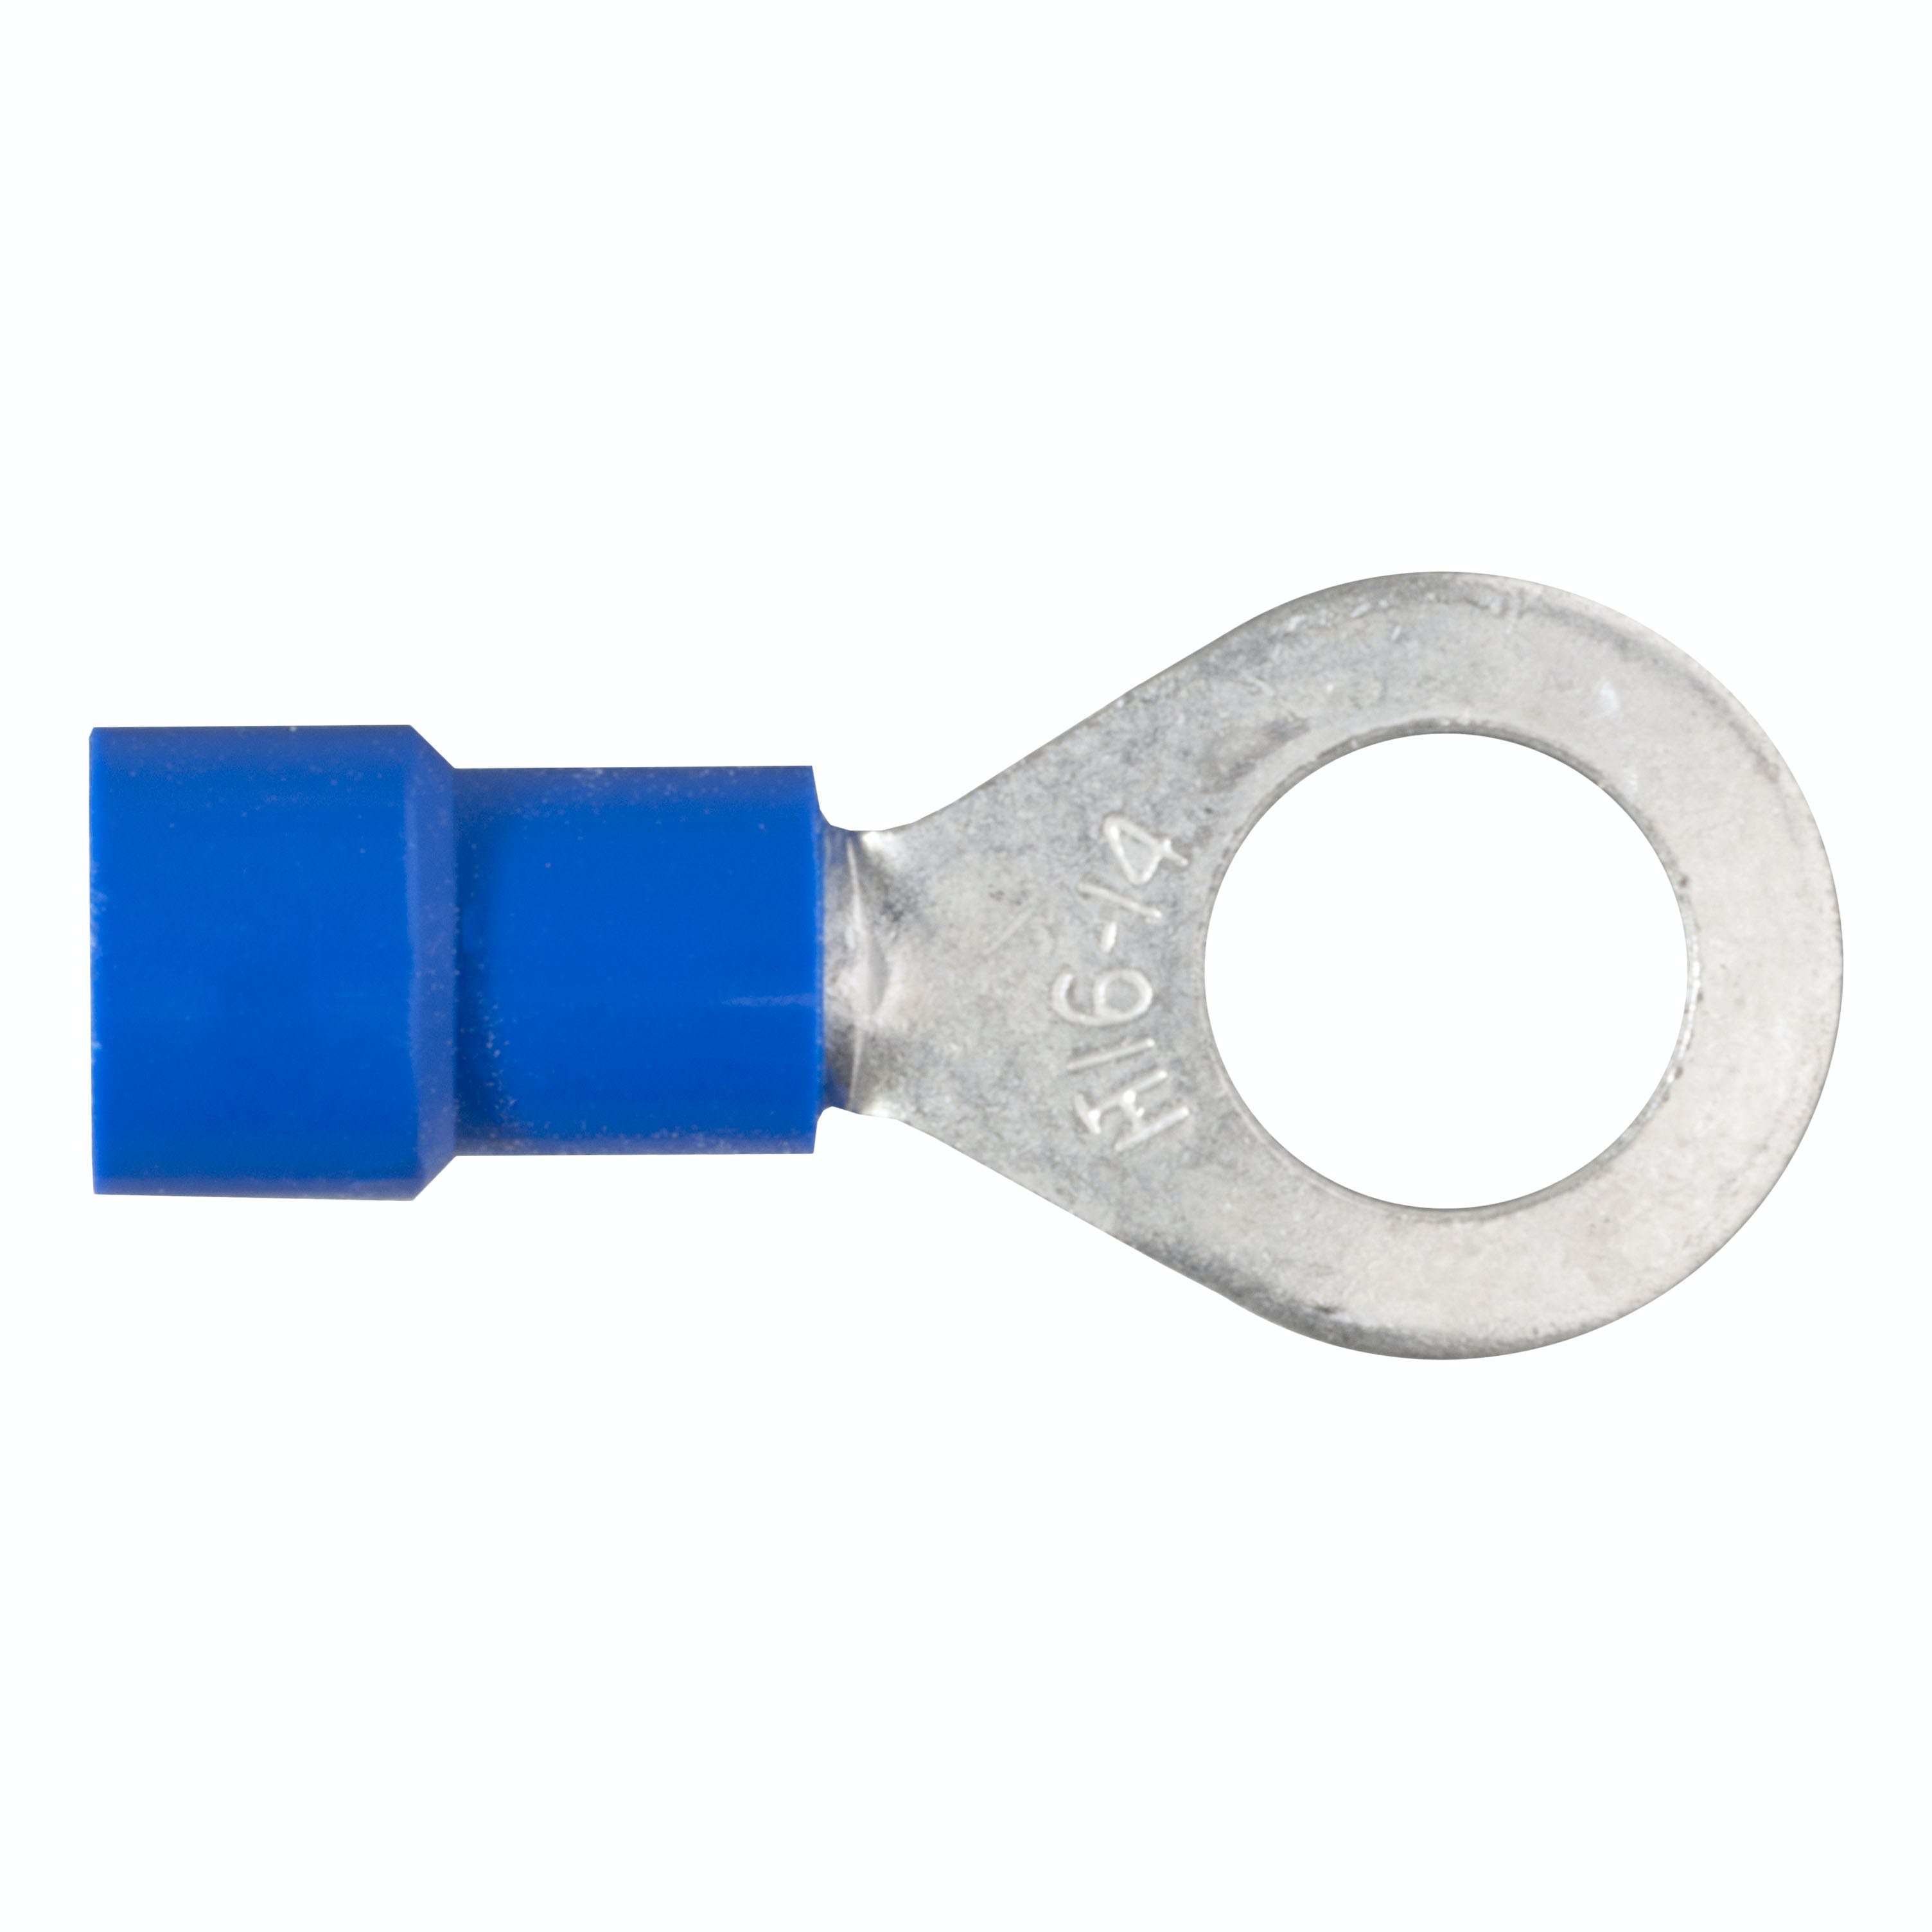 CURT 59522 Ring Terminals (16-14 Wire Gauge, 1/4 Stud Size, 100-Pack)